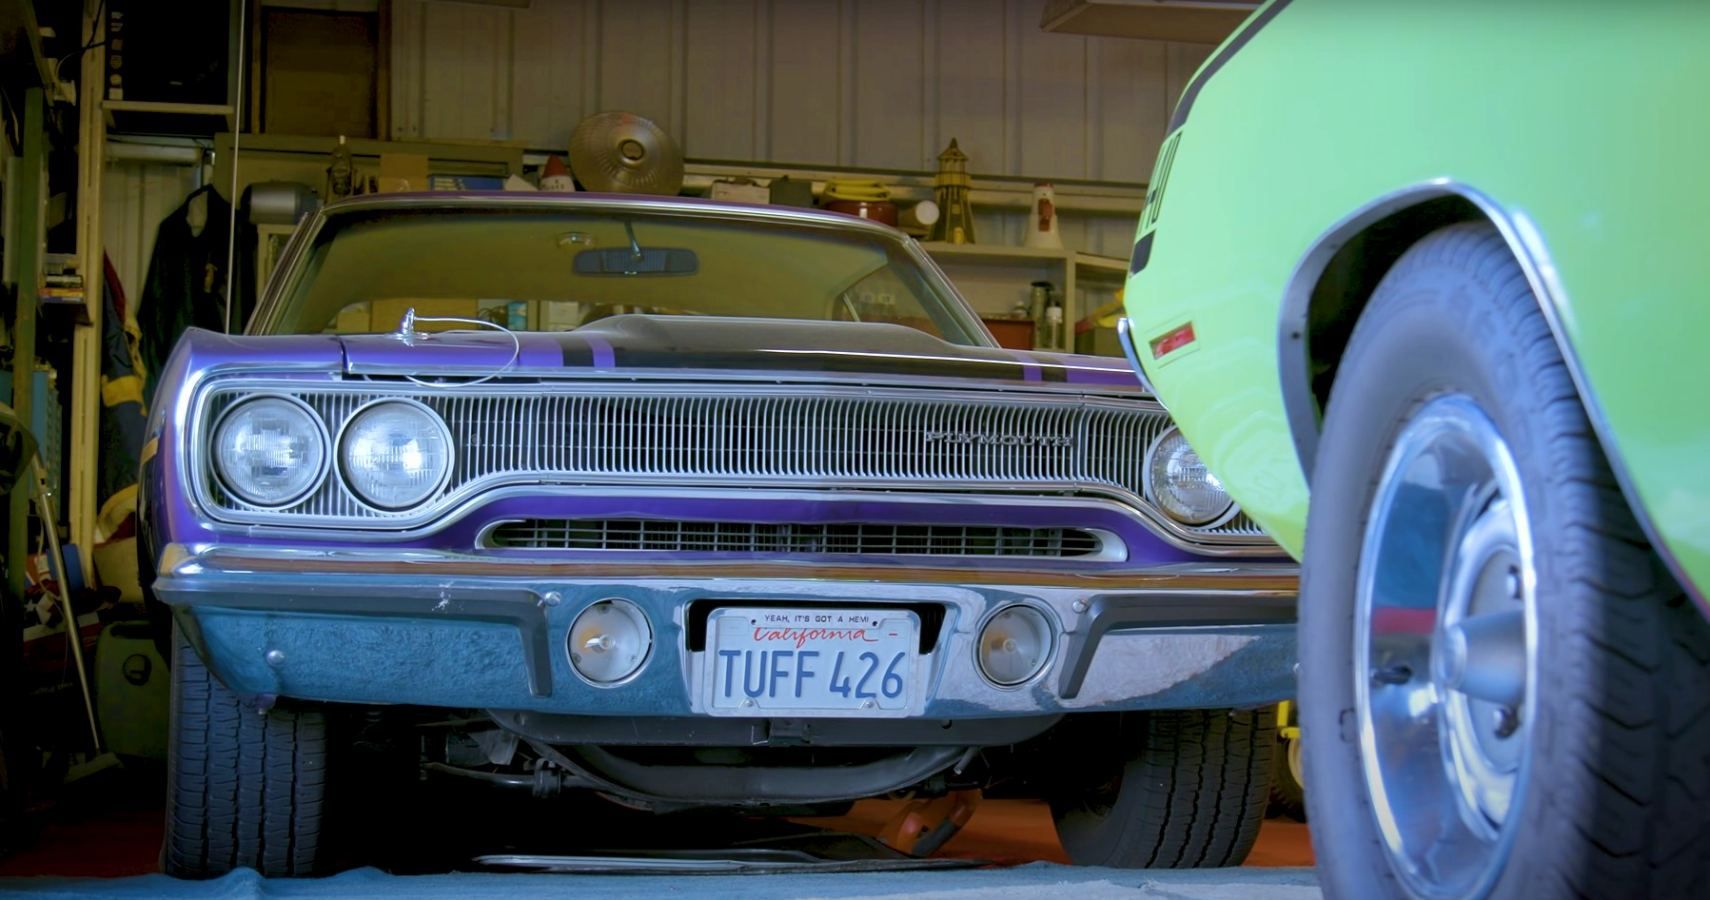 This Outstanding Mopar Ranch Hides A Rare And Wild Muscle Car Collection